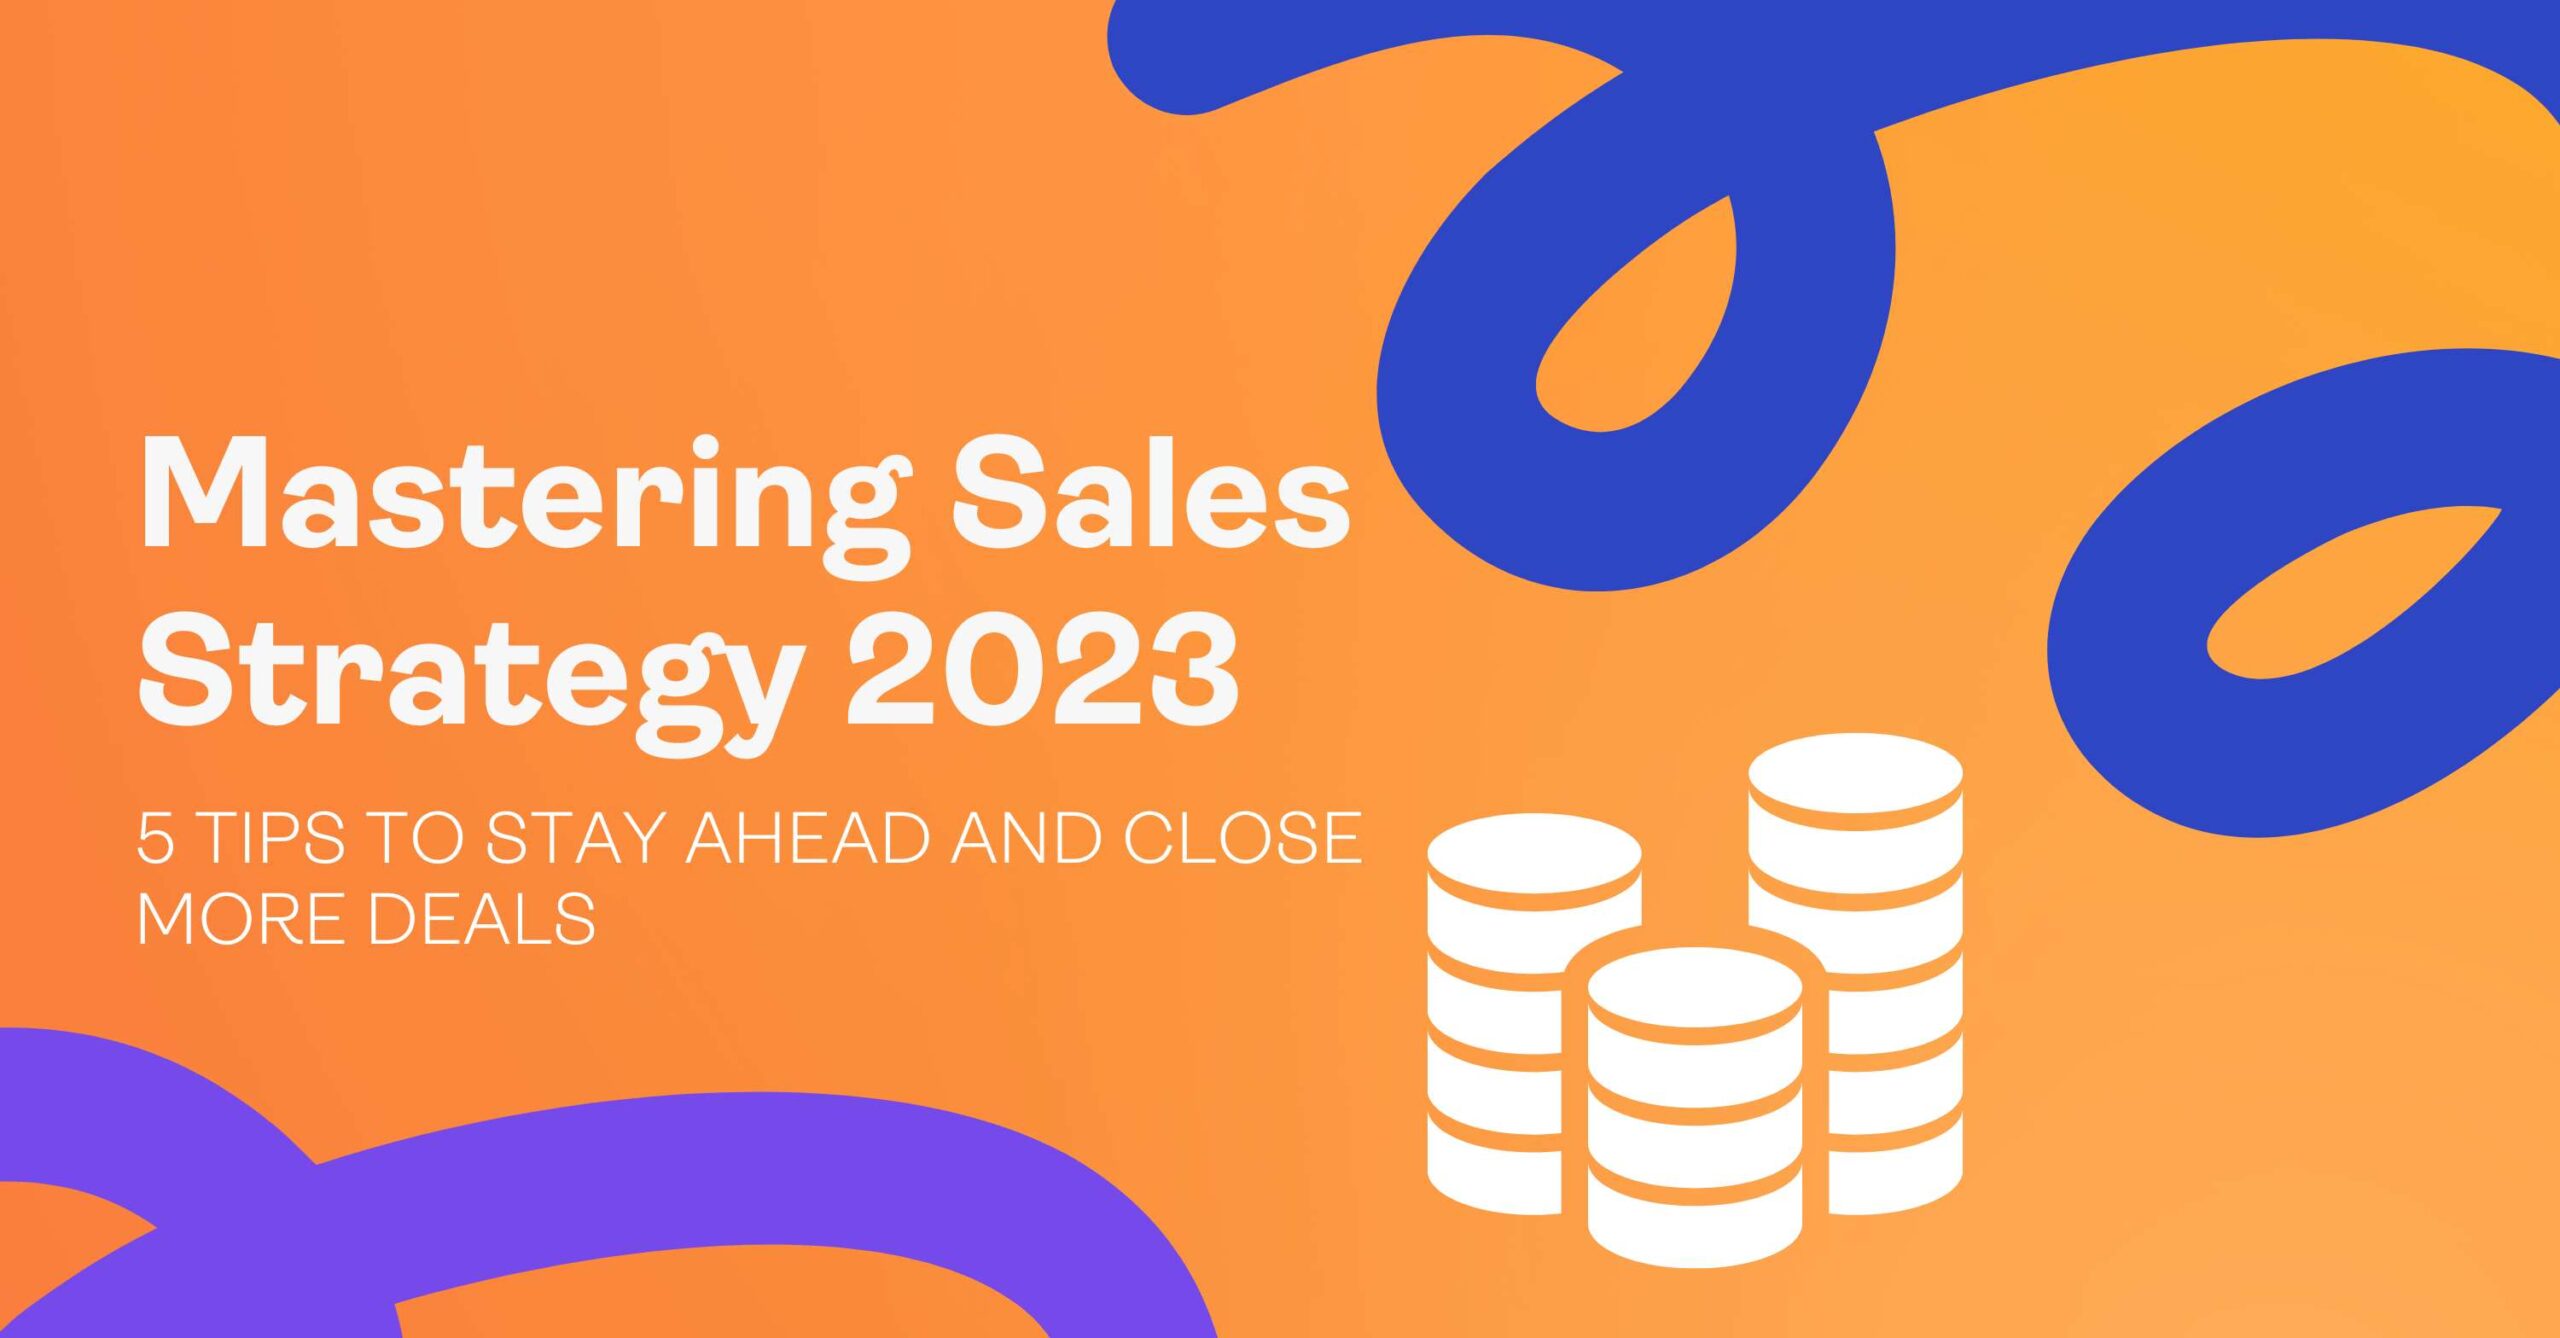 32 Best Marketing Tactics to Drive More Sales (2023)